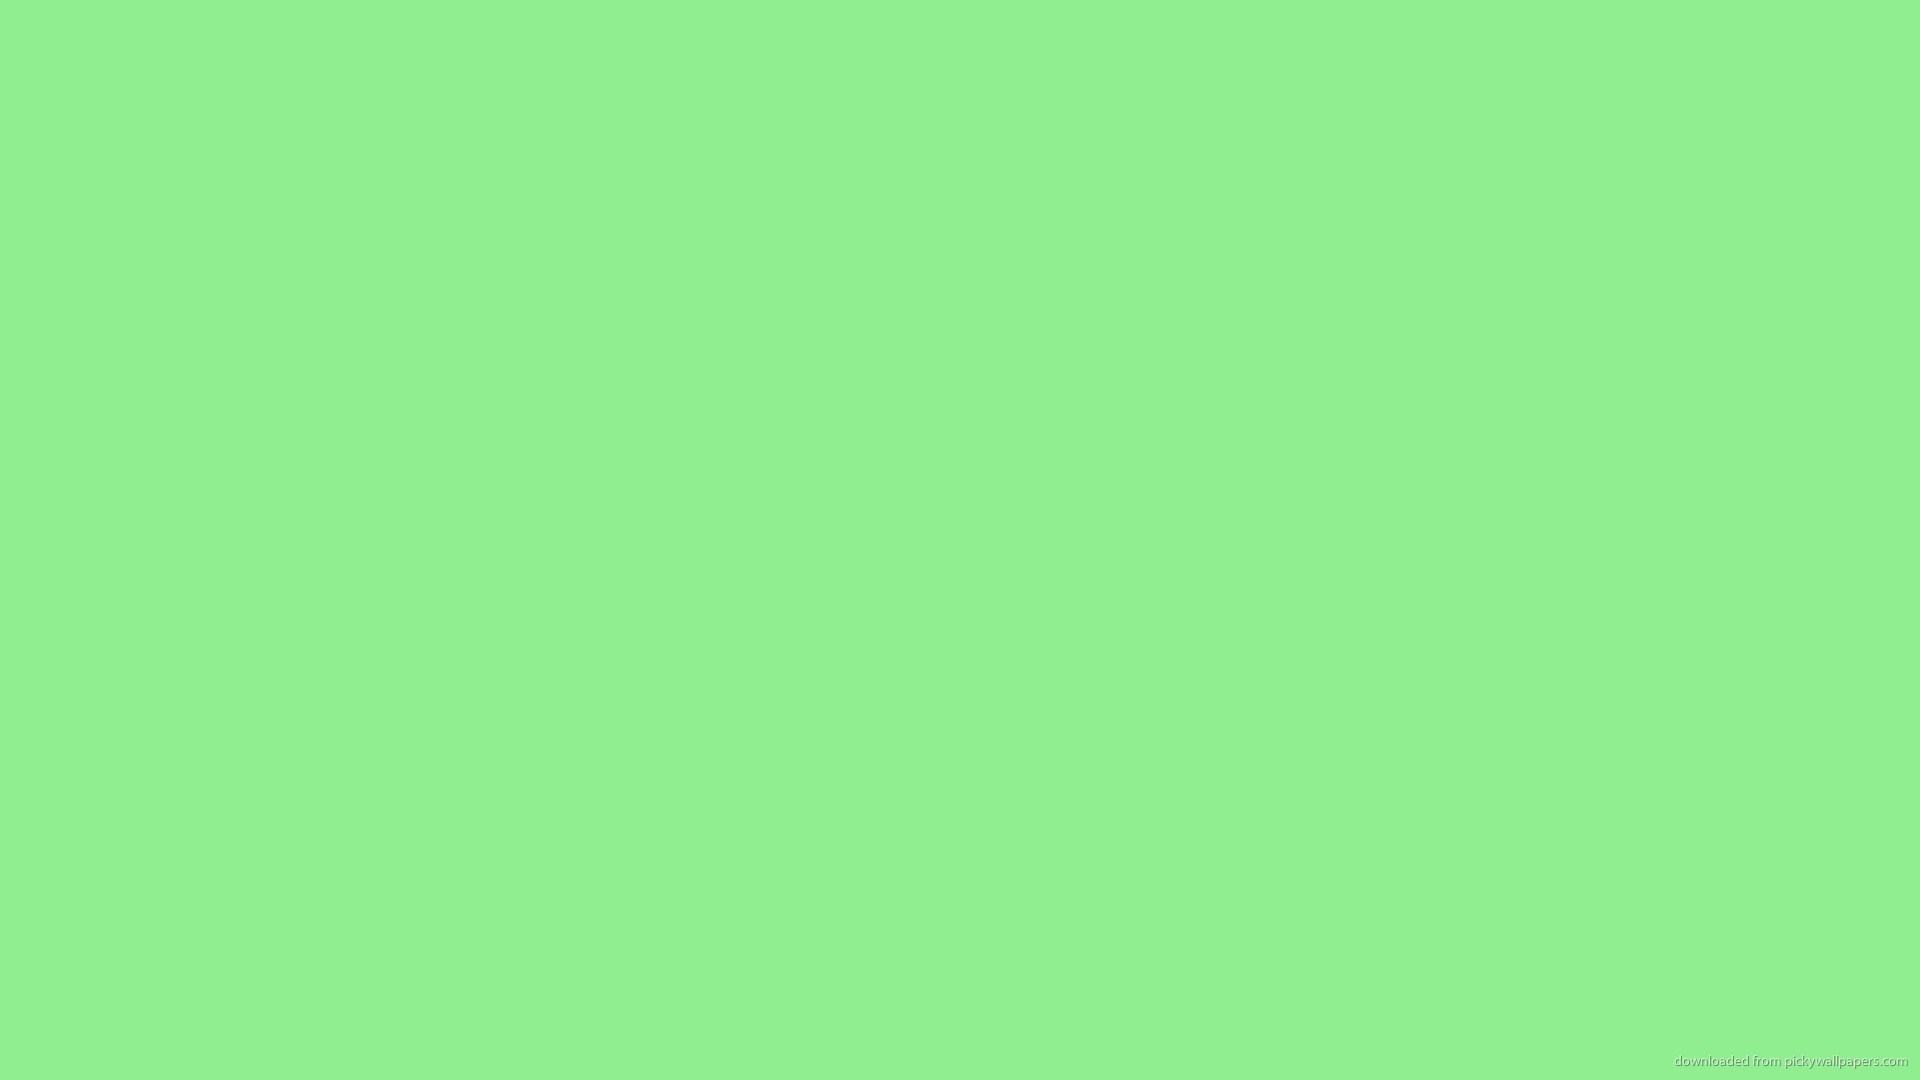 1920x1080 Solid Light Green Color Wallpaper Picture For iPhone, Blackberry, iPad .